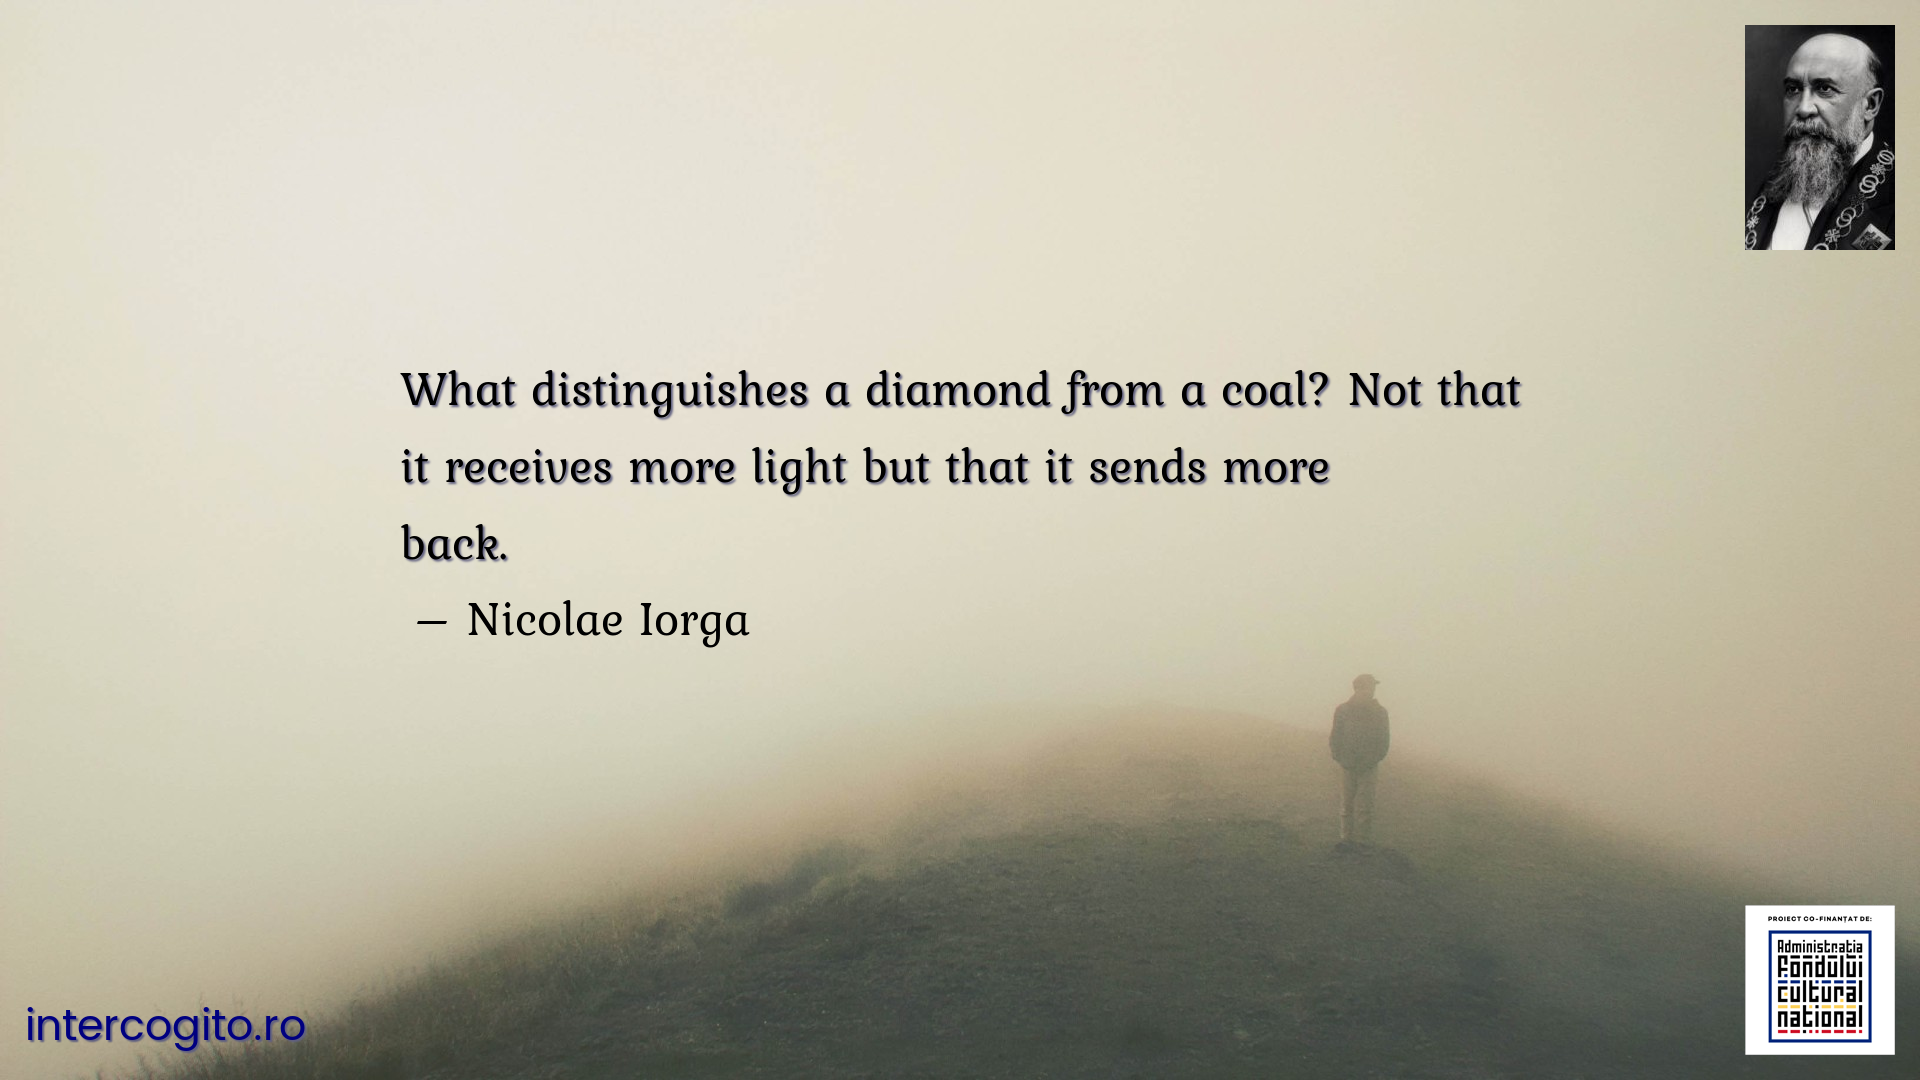 What distinguishes a diamond from a coal? Not that it receives more light but that it sends more back.